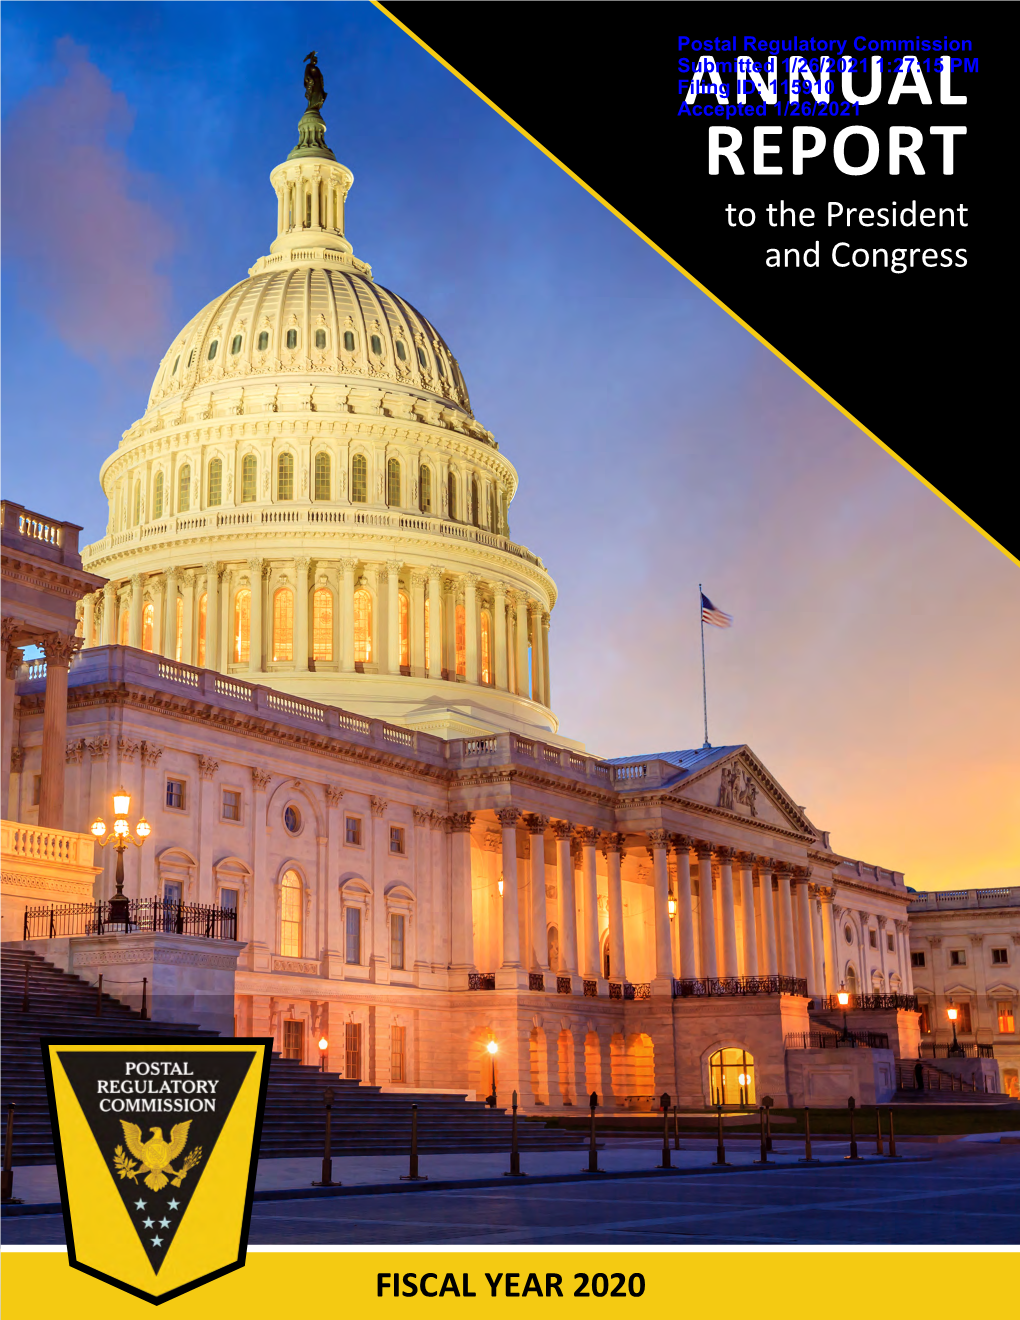 Annual Report to the President and Congress on Behalf of the Postal Regulatory Commission, I Am Pleased to Present Our